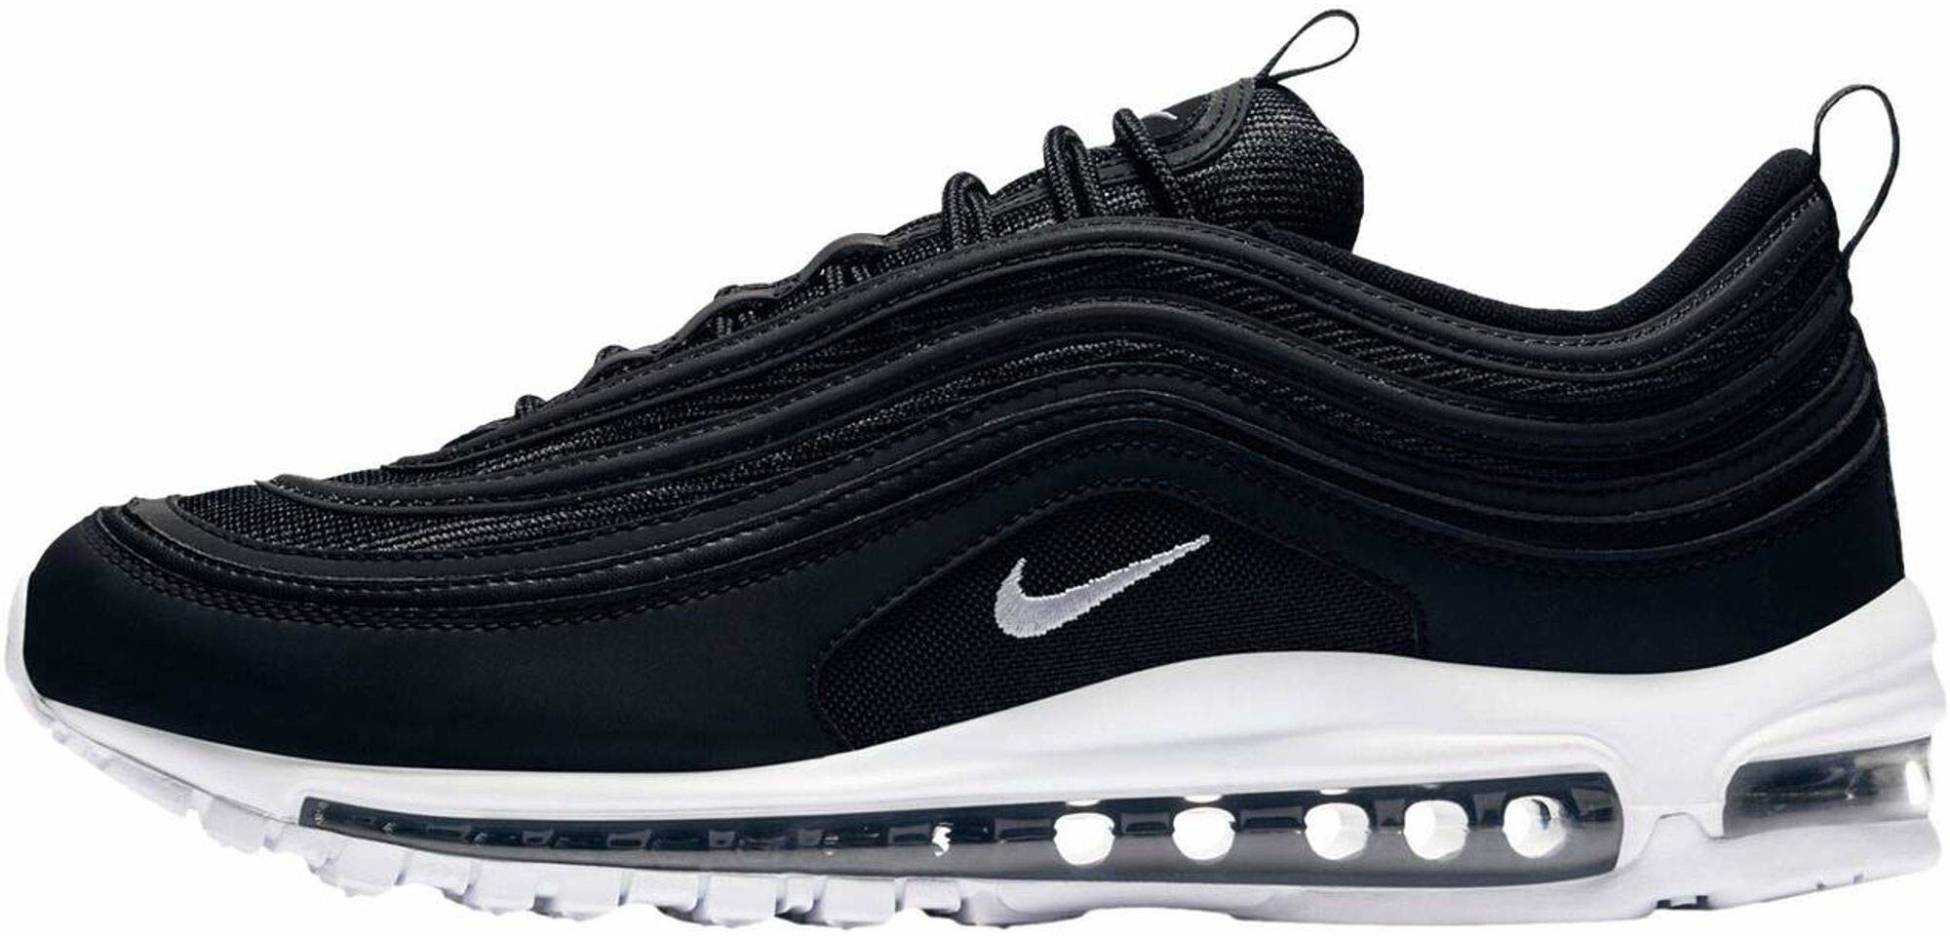 Wear out society gallop Nike Air Max 97 sneakers in 70+ colors (only $150) | RunRepeat